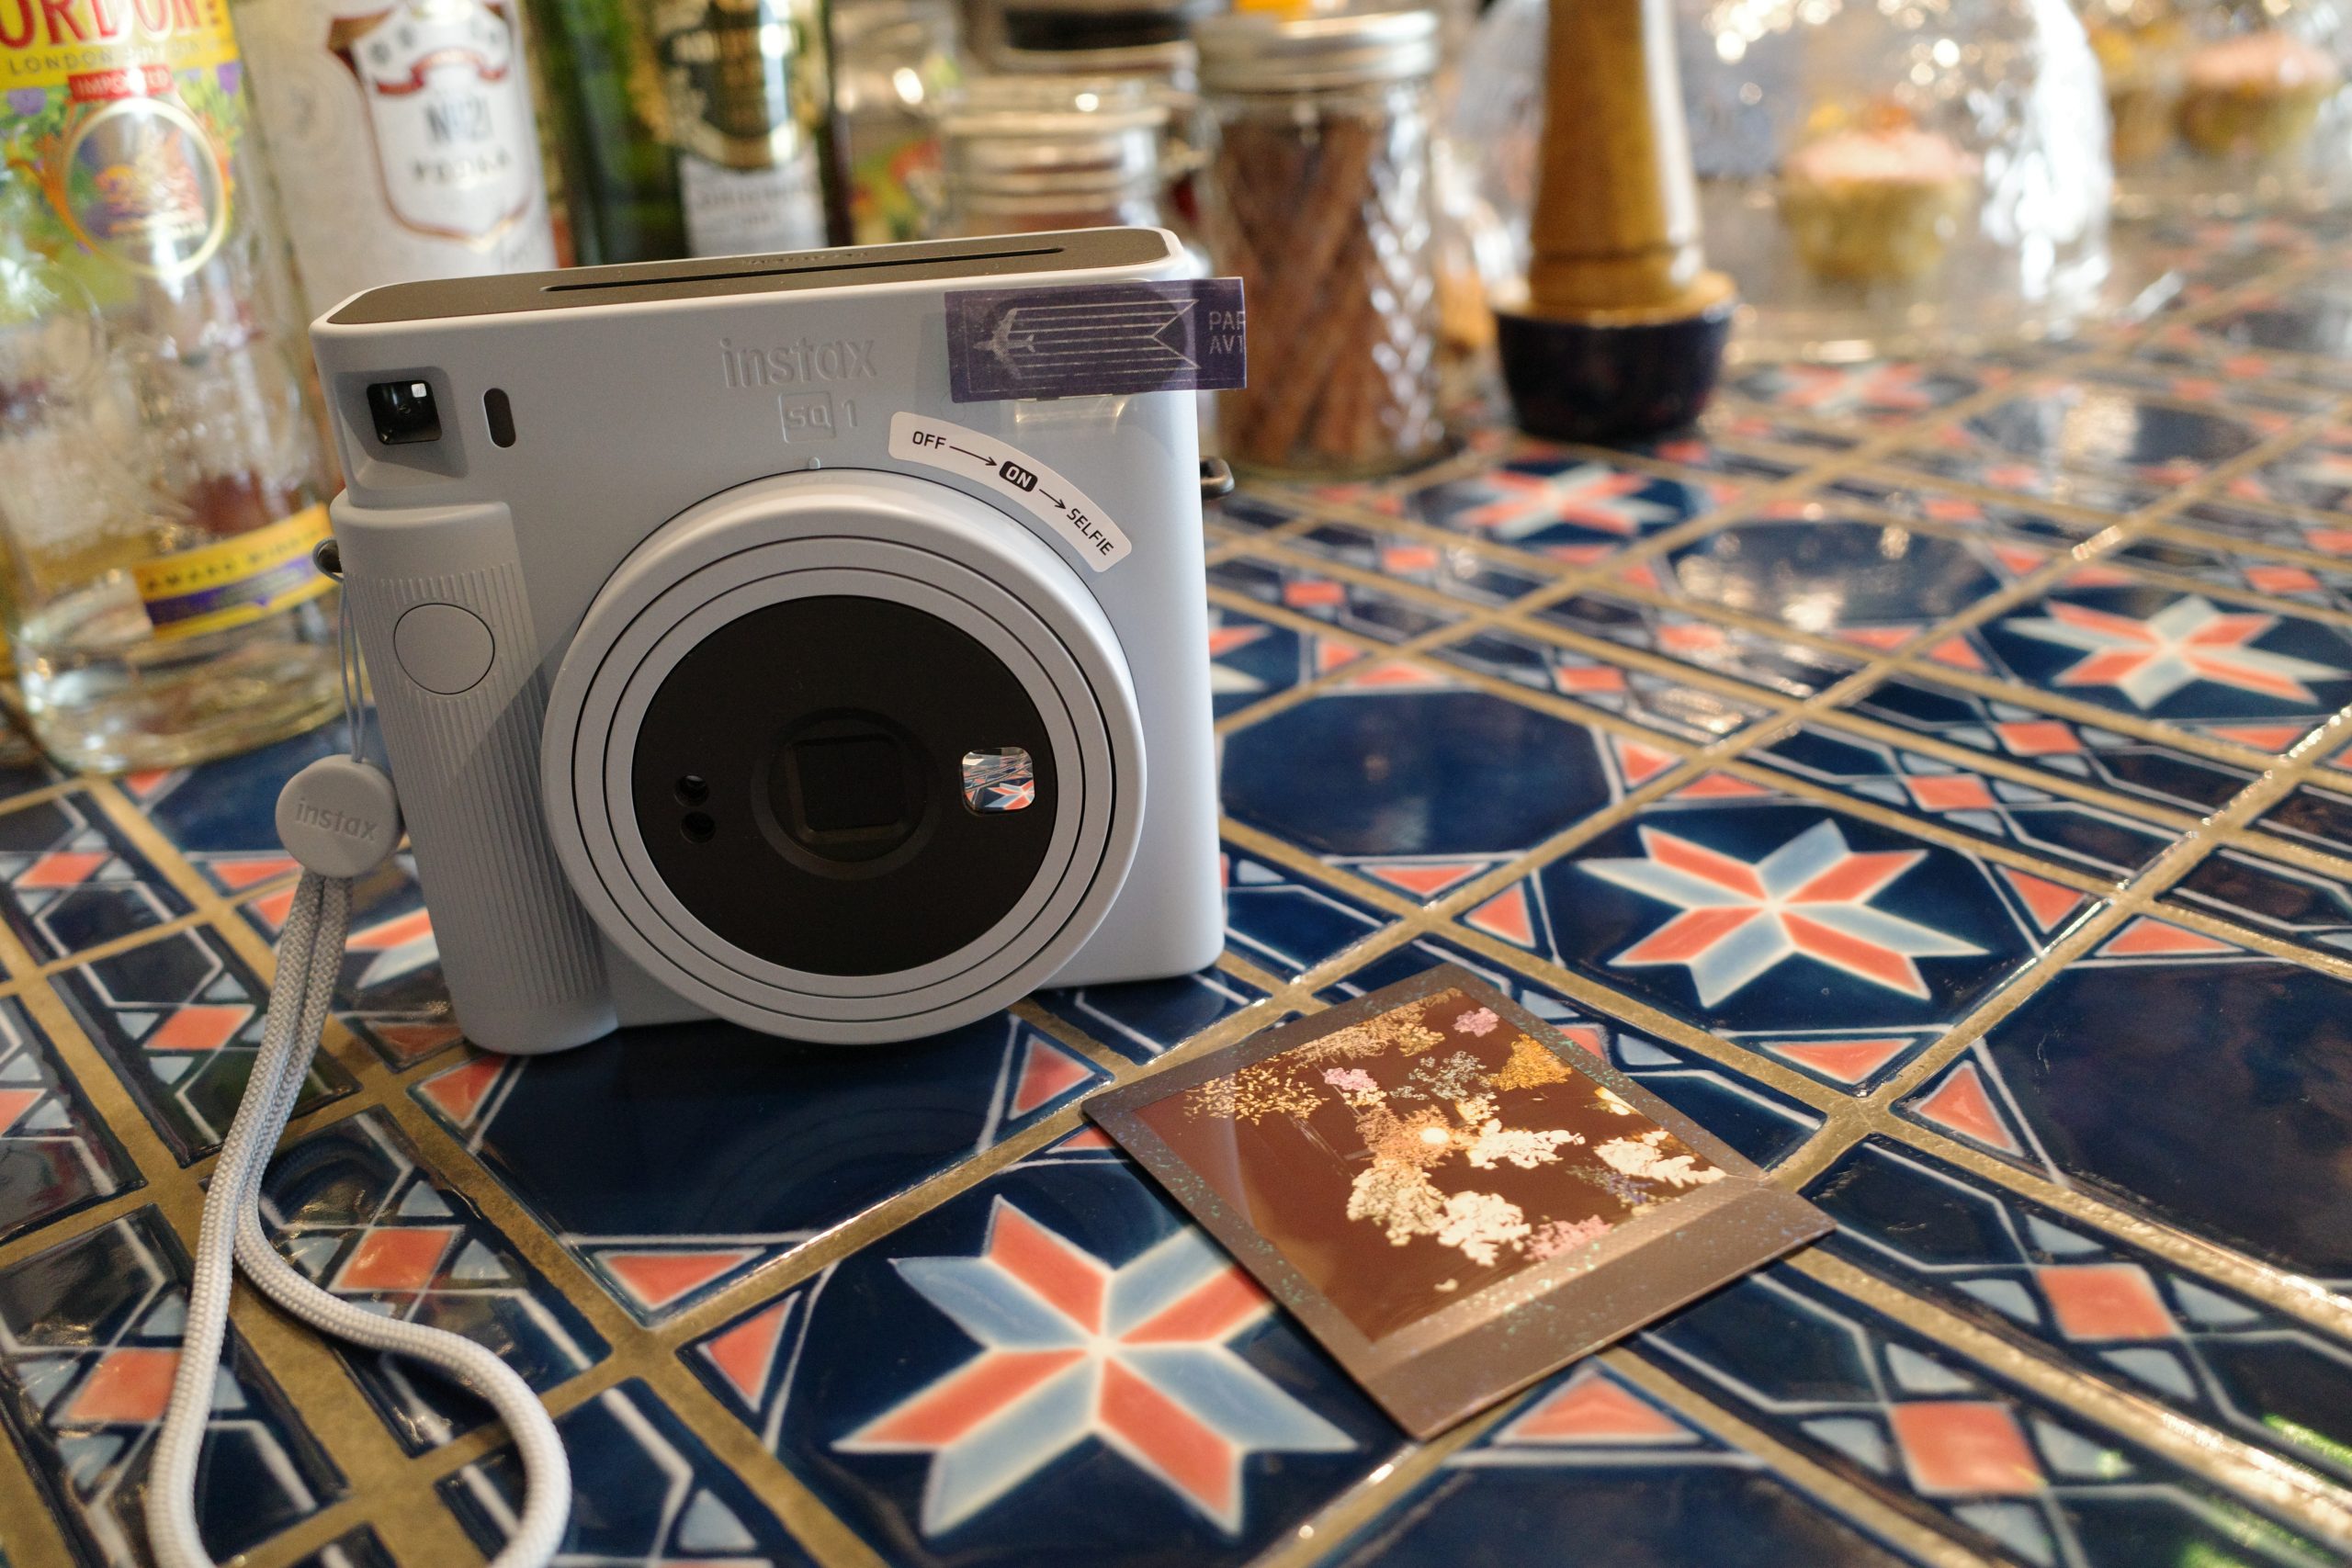 FUJIFILM】チェキの進化が凄い！instax SQUARE SQ1 Vol.3 | THE MAP TIMES